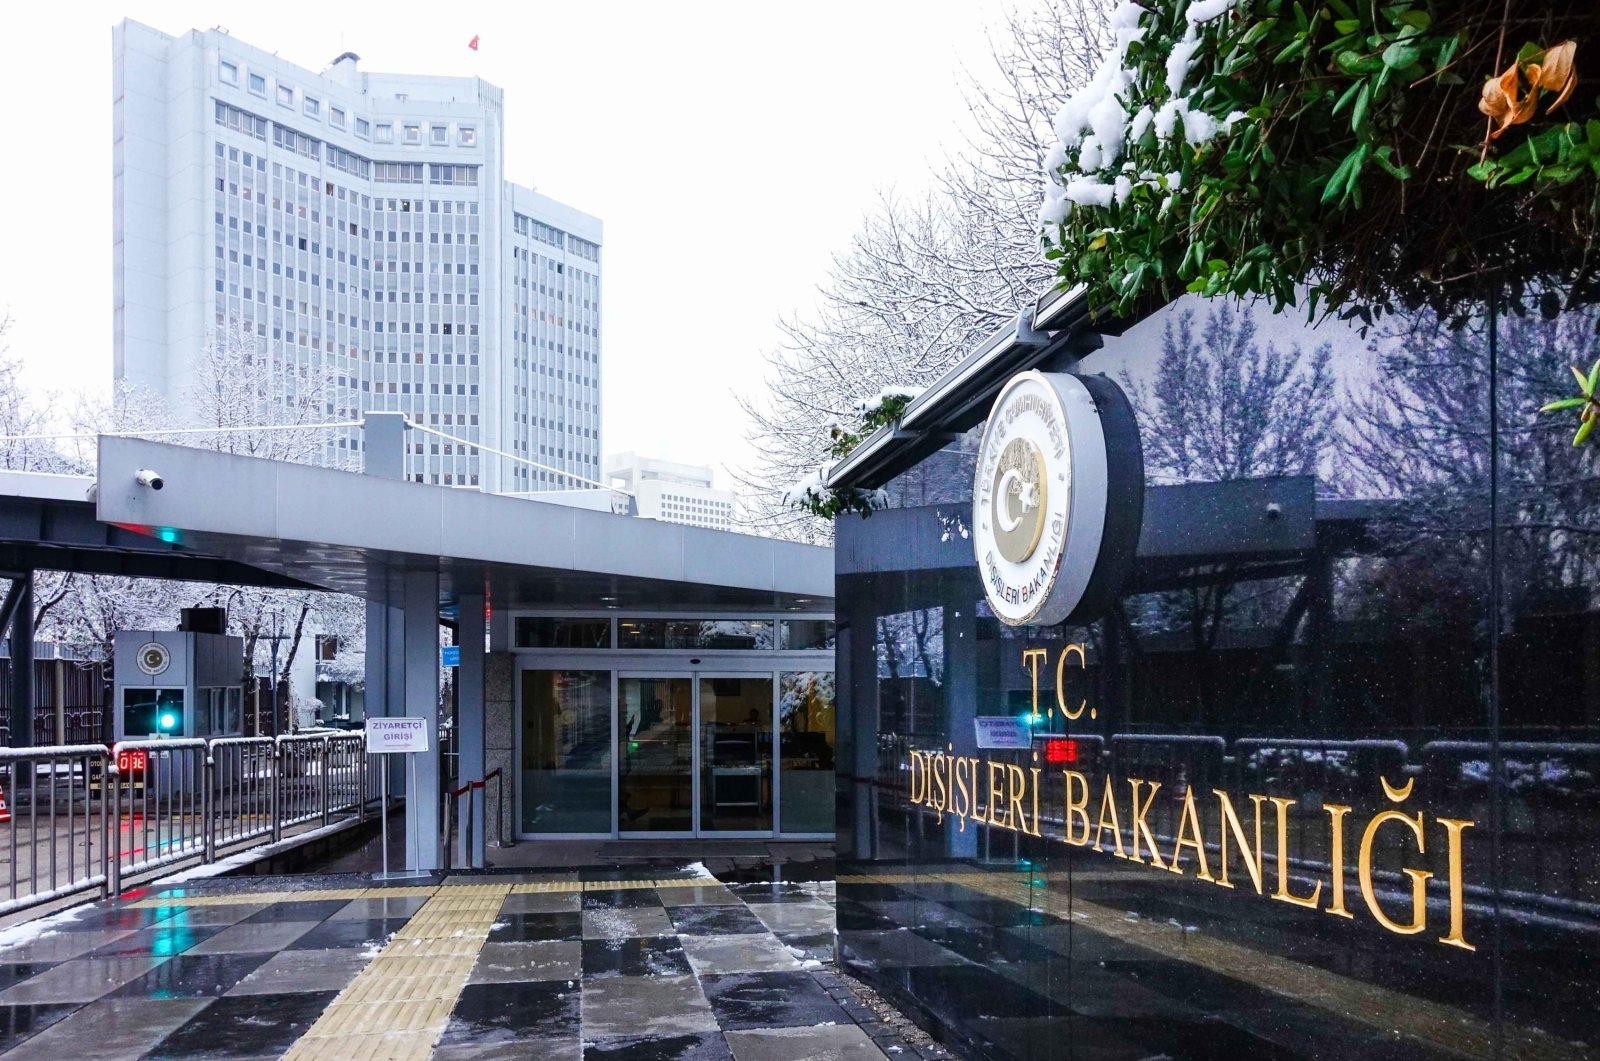 Foreign Ministry headquarters in Ankara, Turkey in this undated file photo.